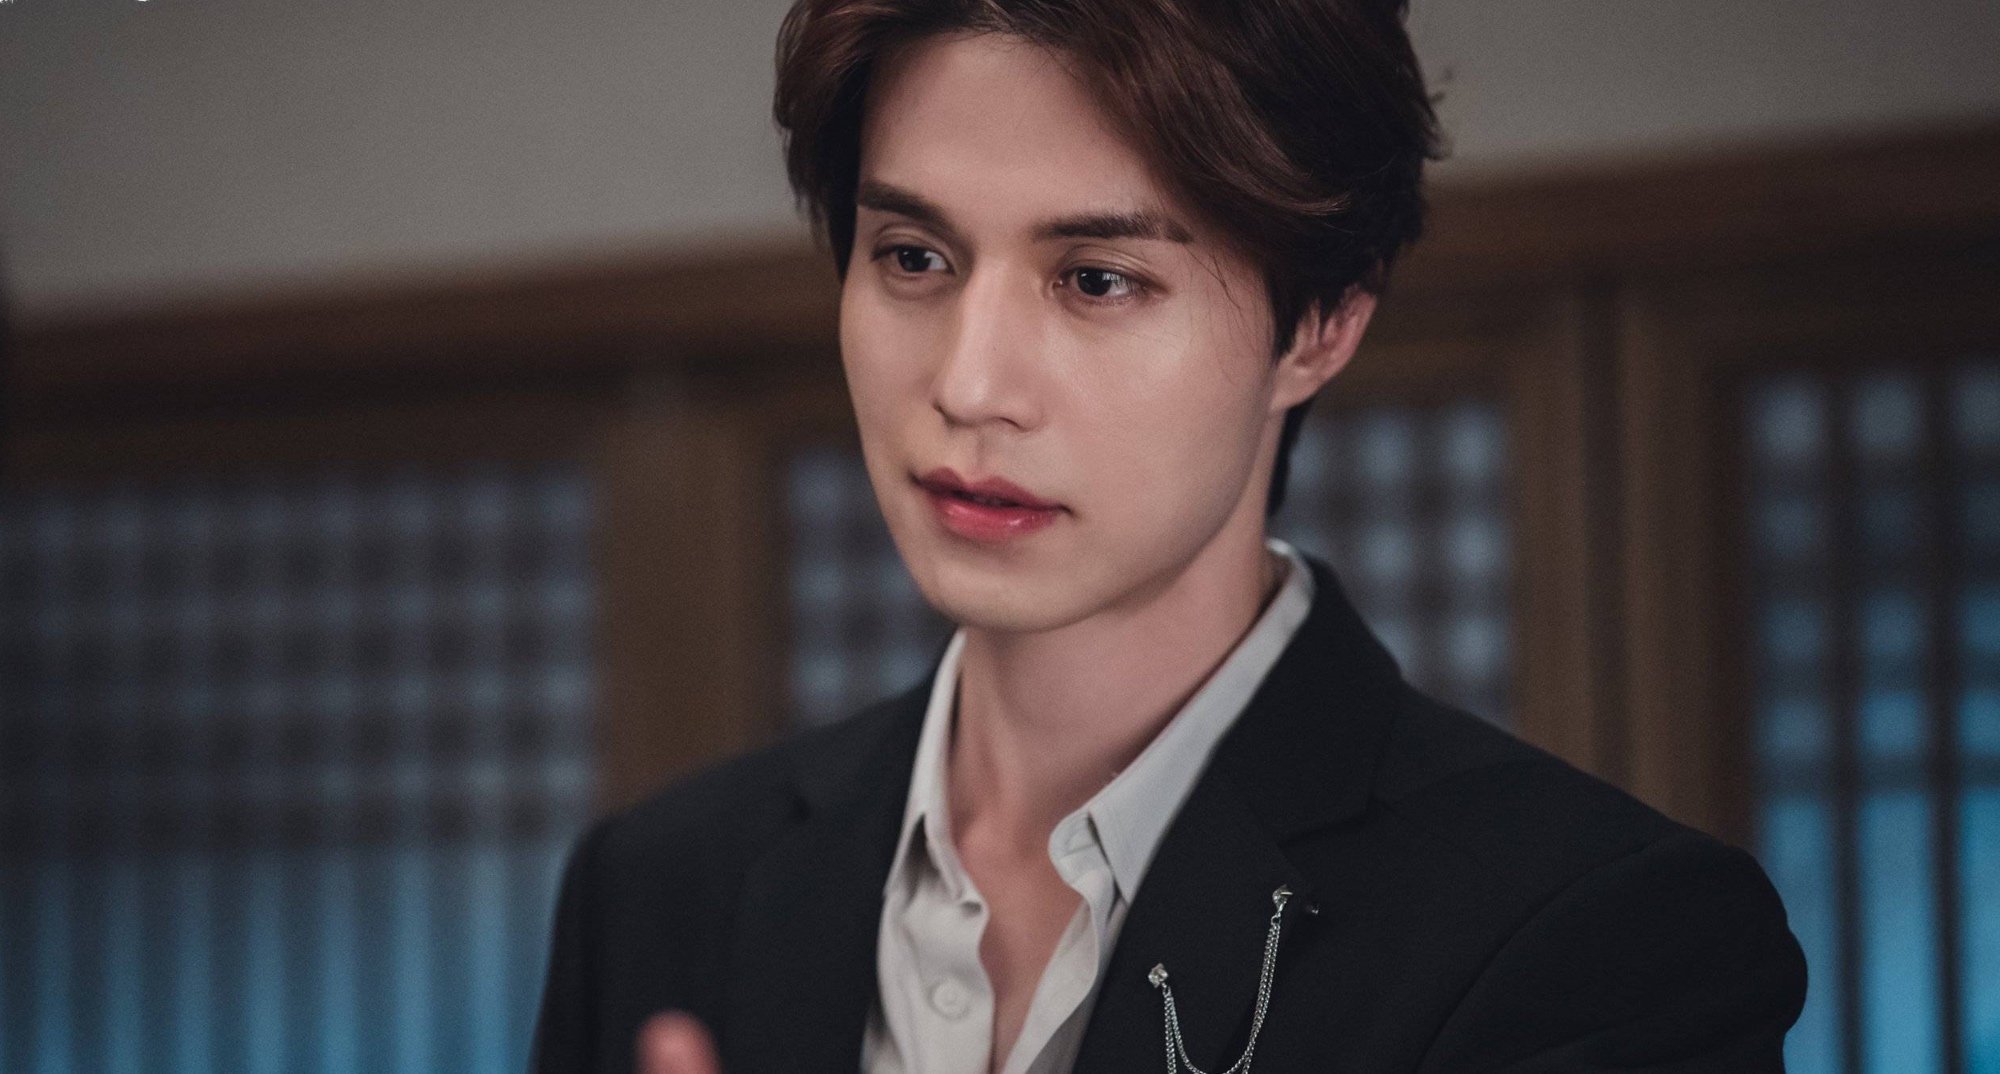 Lee Dong-wook as Lee Yeon in 'Tale of the Nine-Tailed' for Season 2 wearing suit jacket.